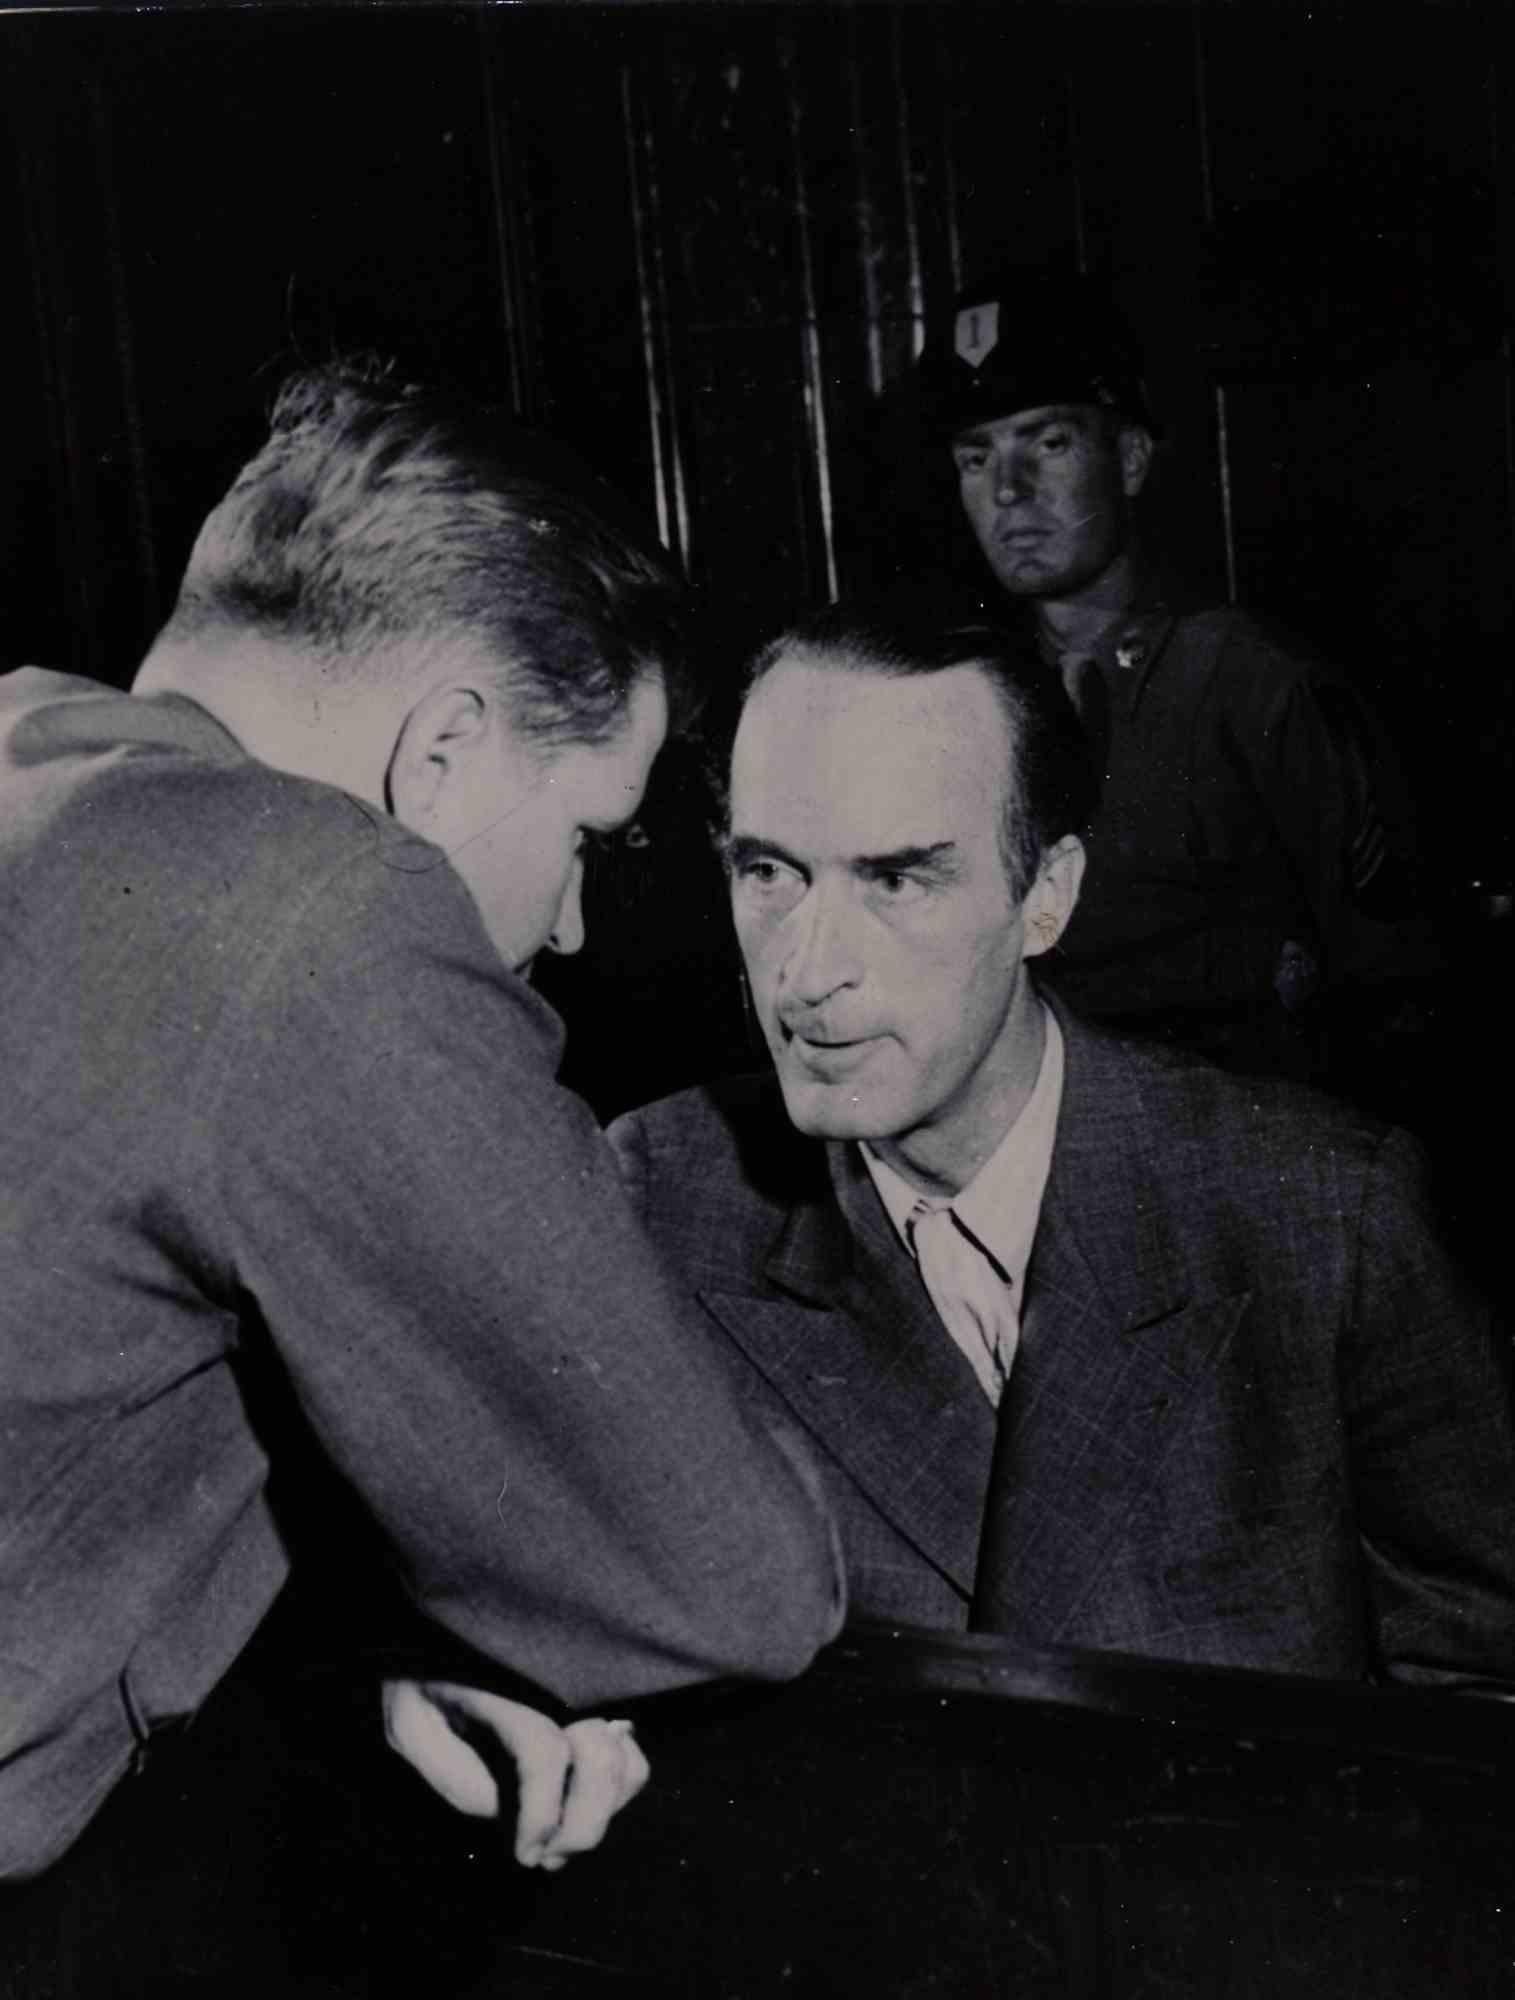 Unknown Figurative Photograph - Historical Photo - Alfried Krupp Charged with War Crimes - mid-20th Century